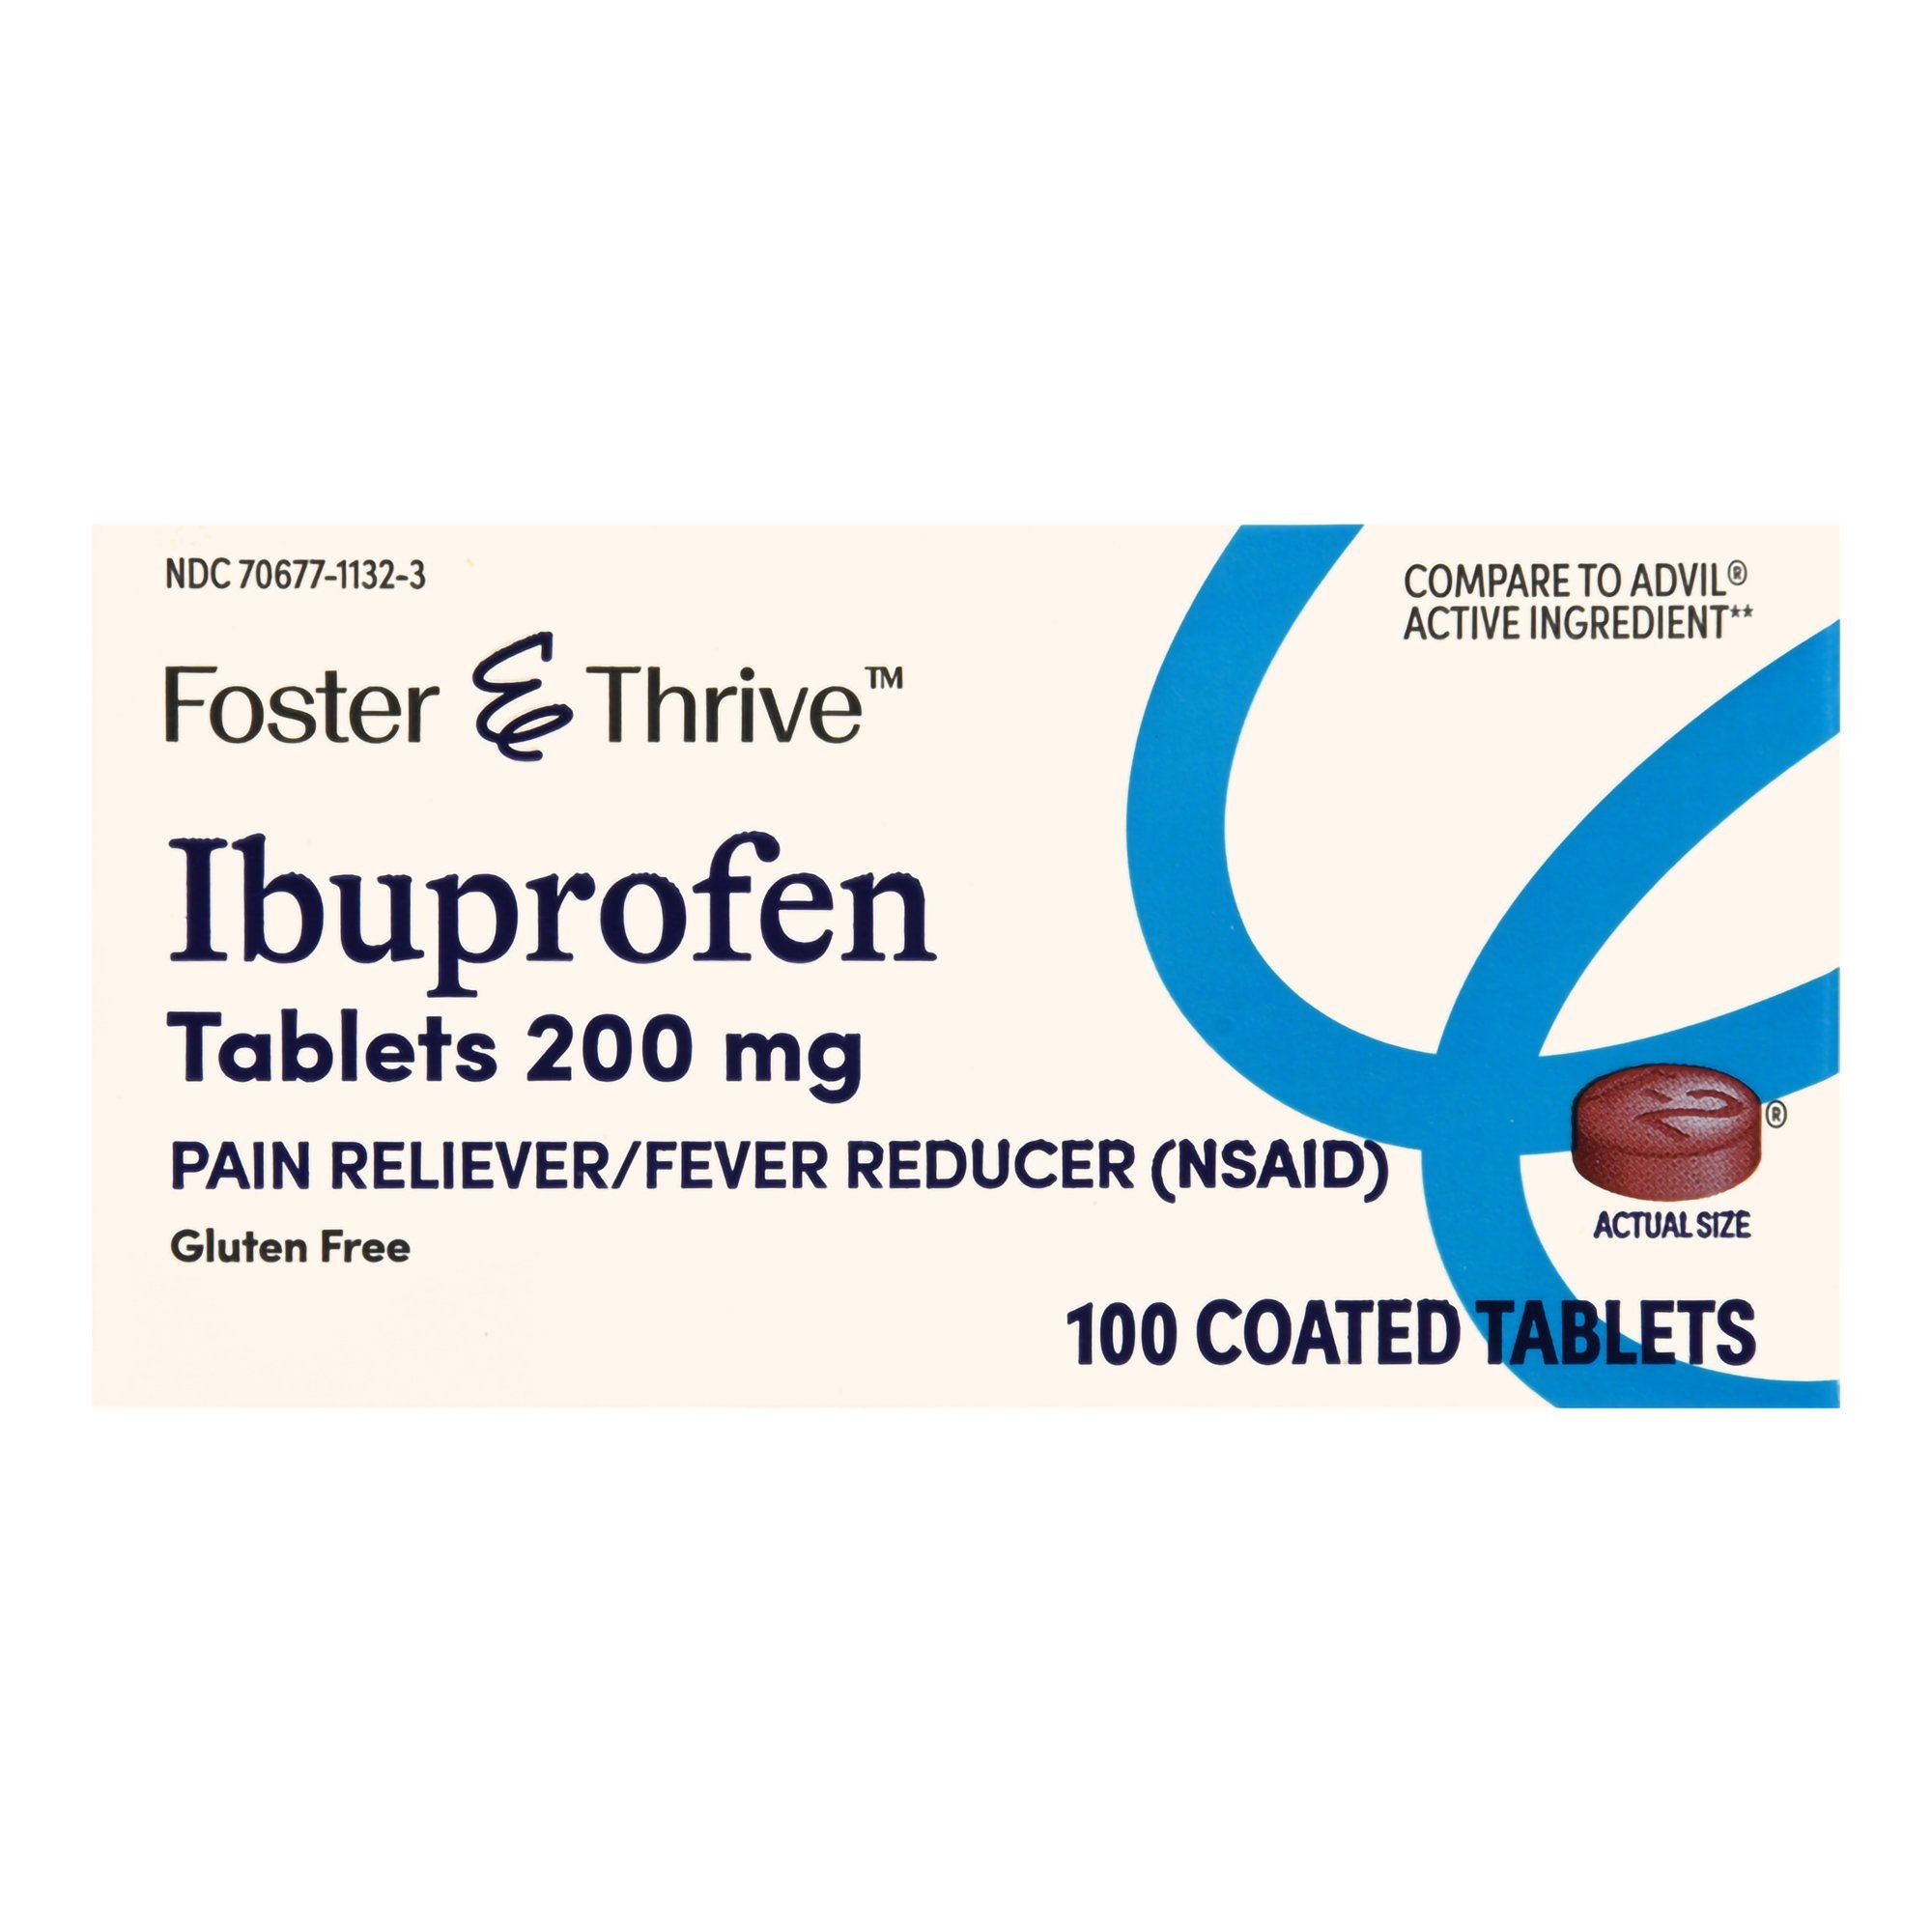 Foster & Thrive Ibuprofen Coated Tablets, 200 mg - 100 ct